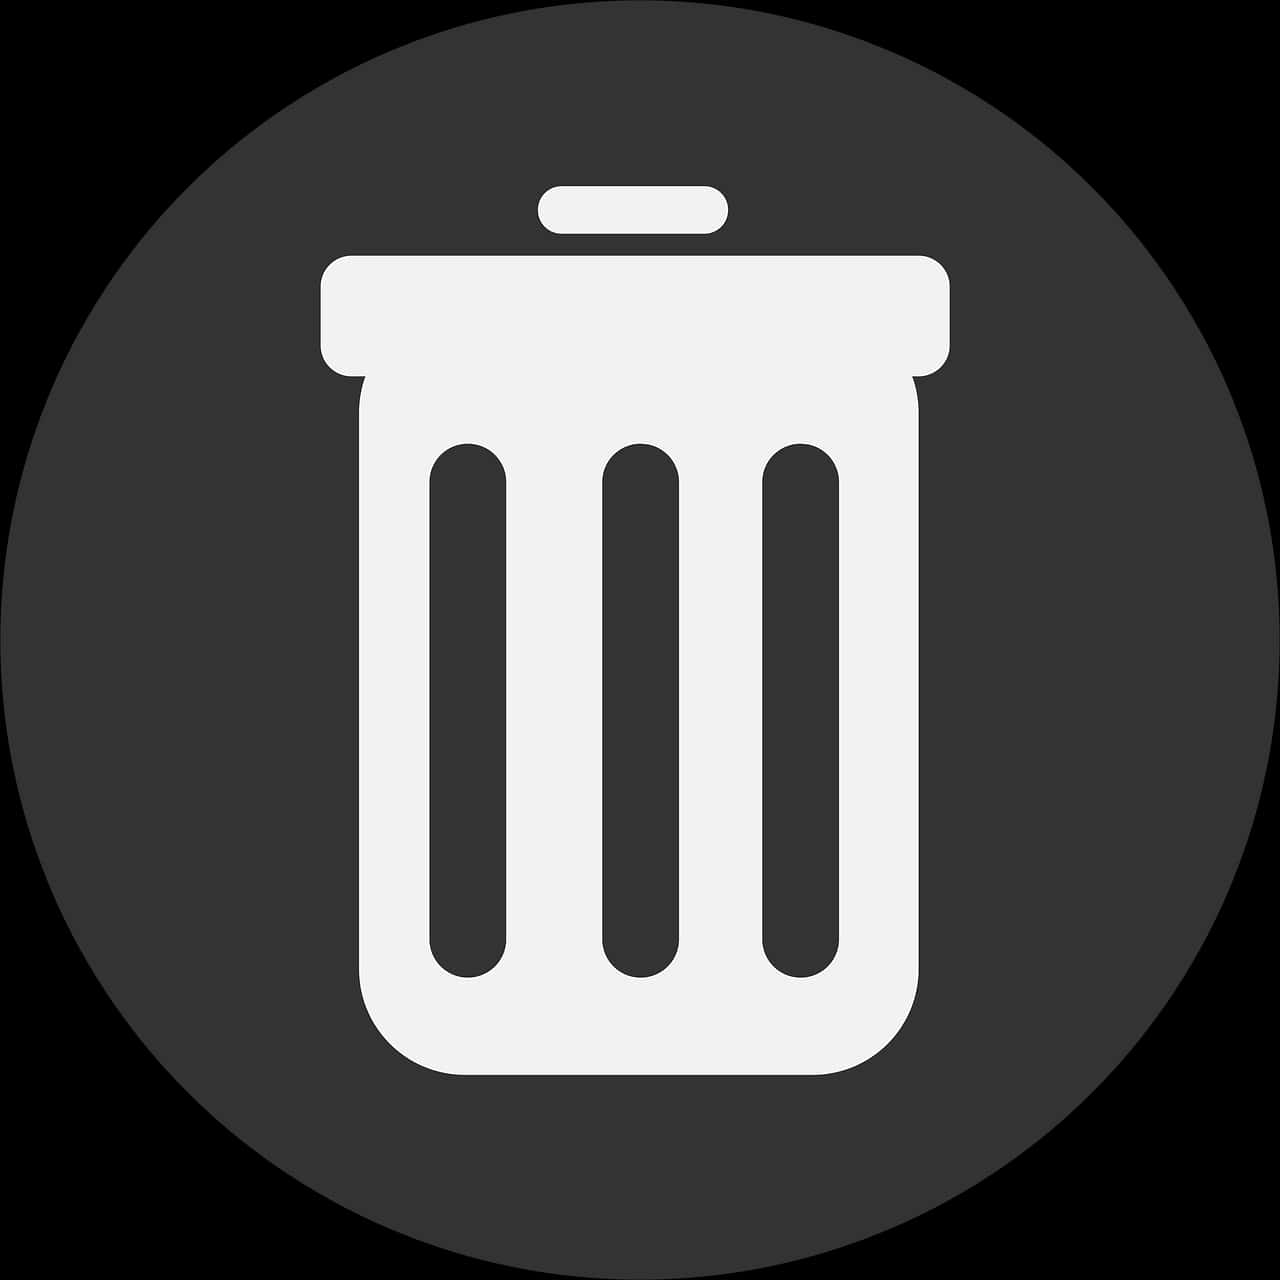 A White Trash Can In A Black Circle